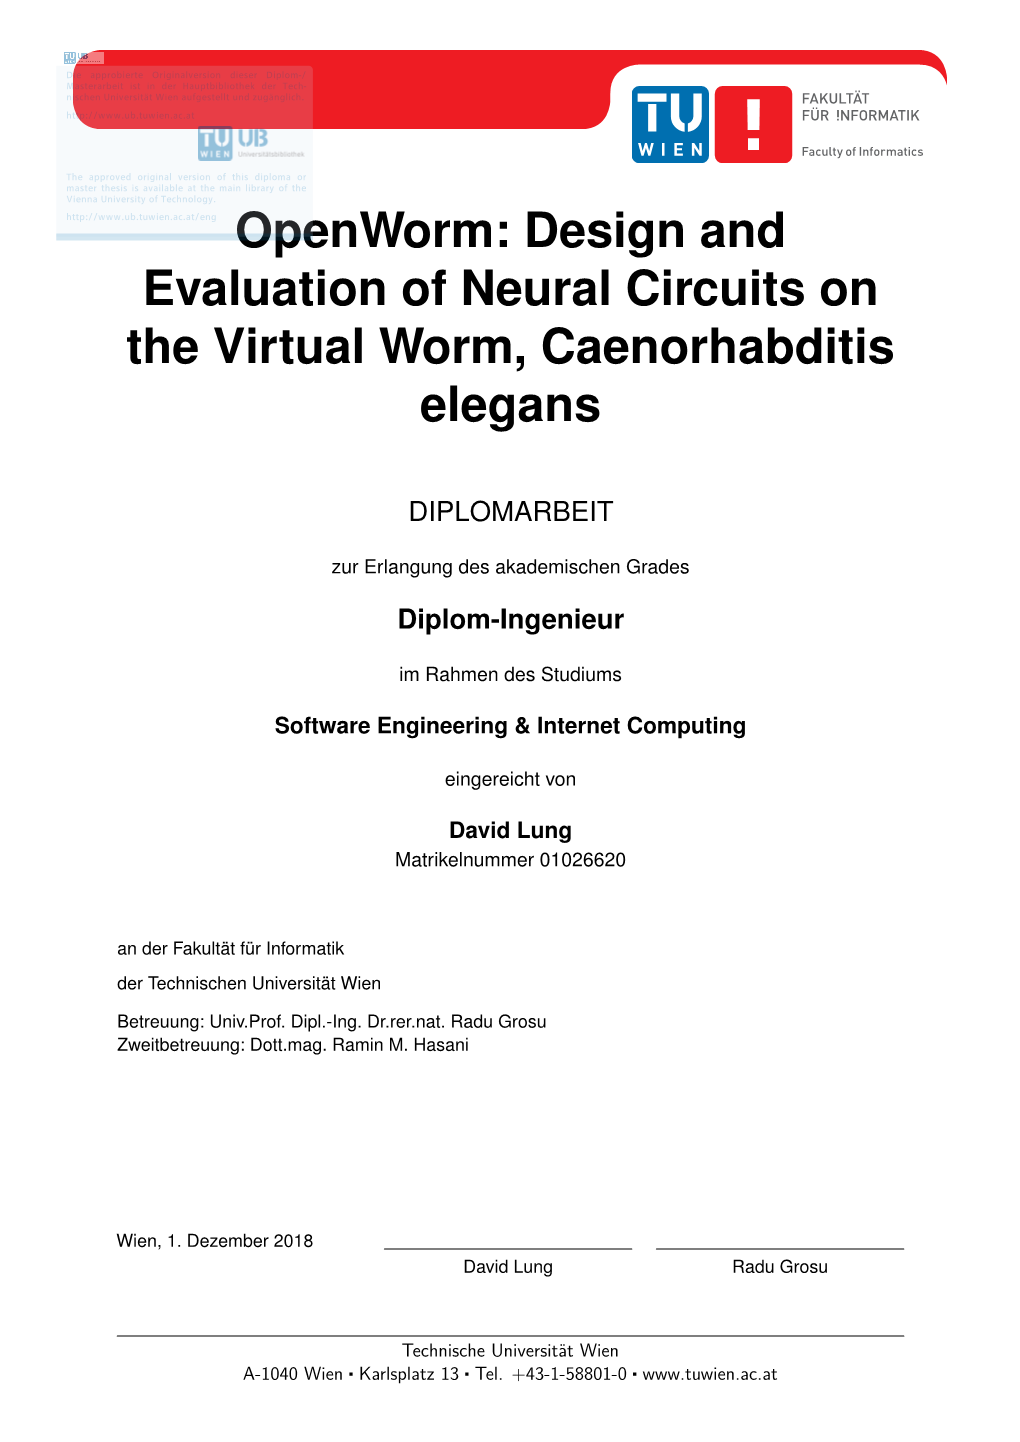 Openworm: Design and Evaluation of Neural Circuits on the Virtual Worm, Caenorhabditis Elegans